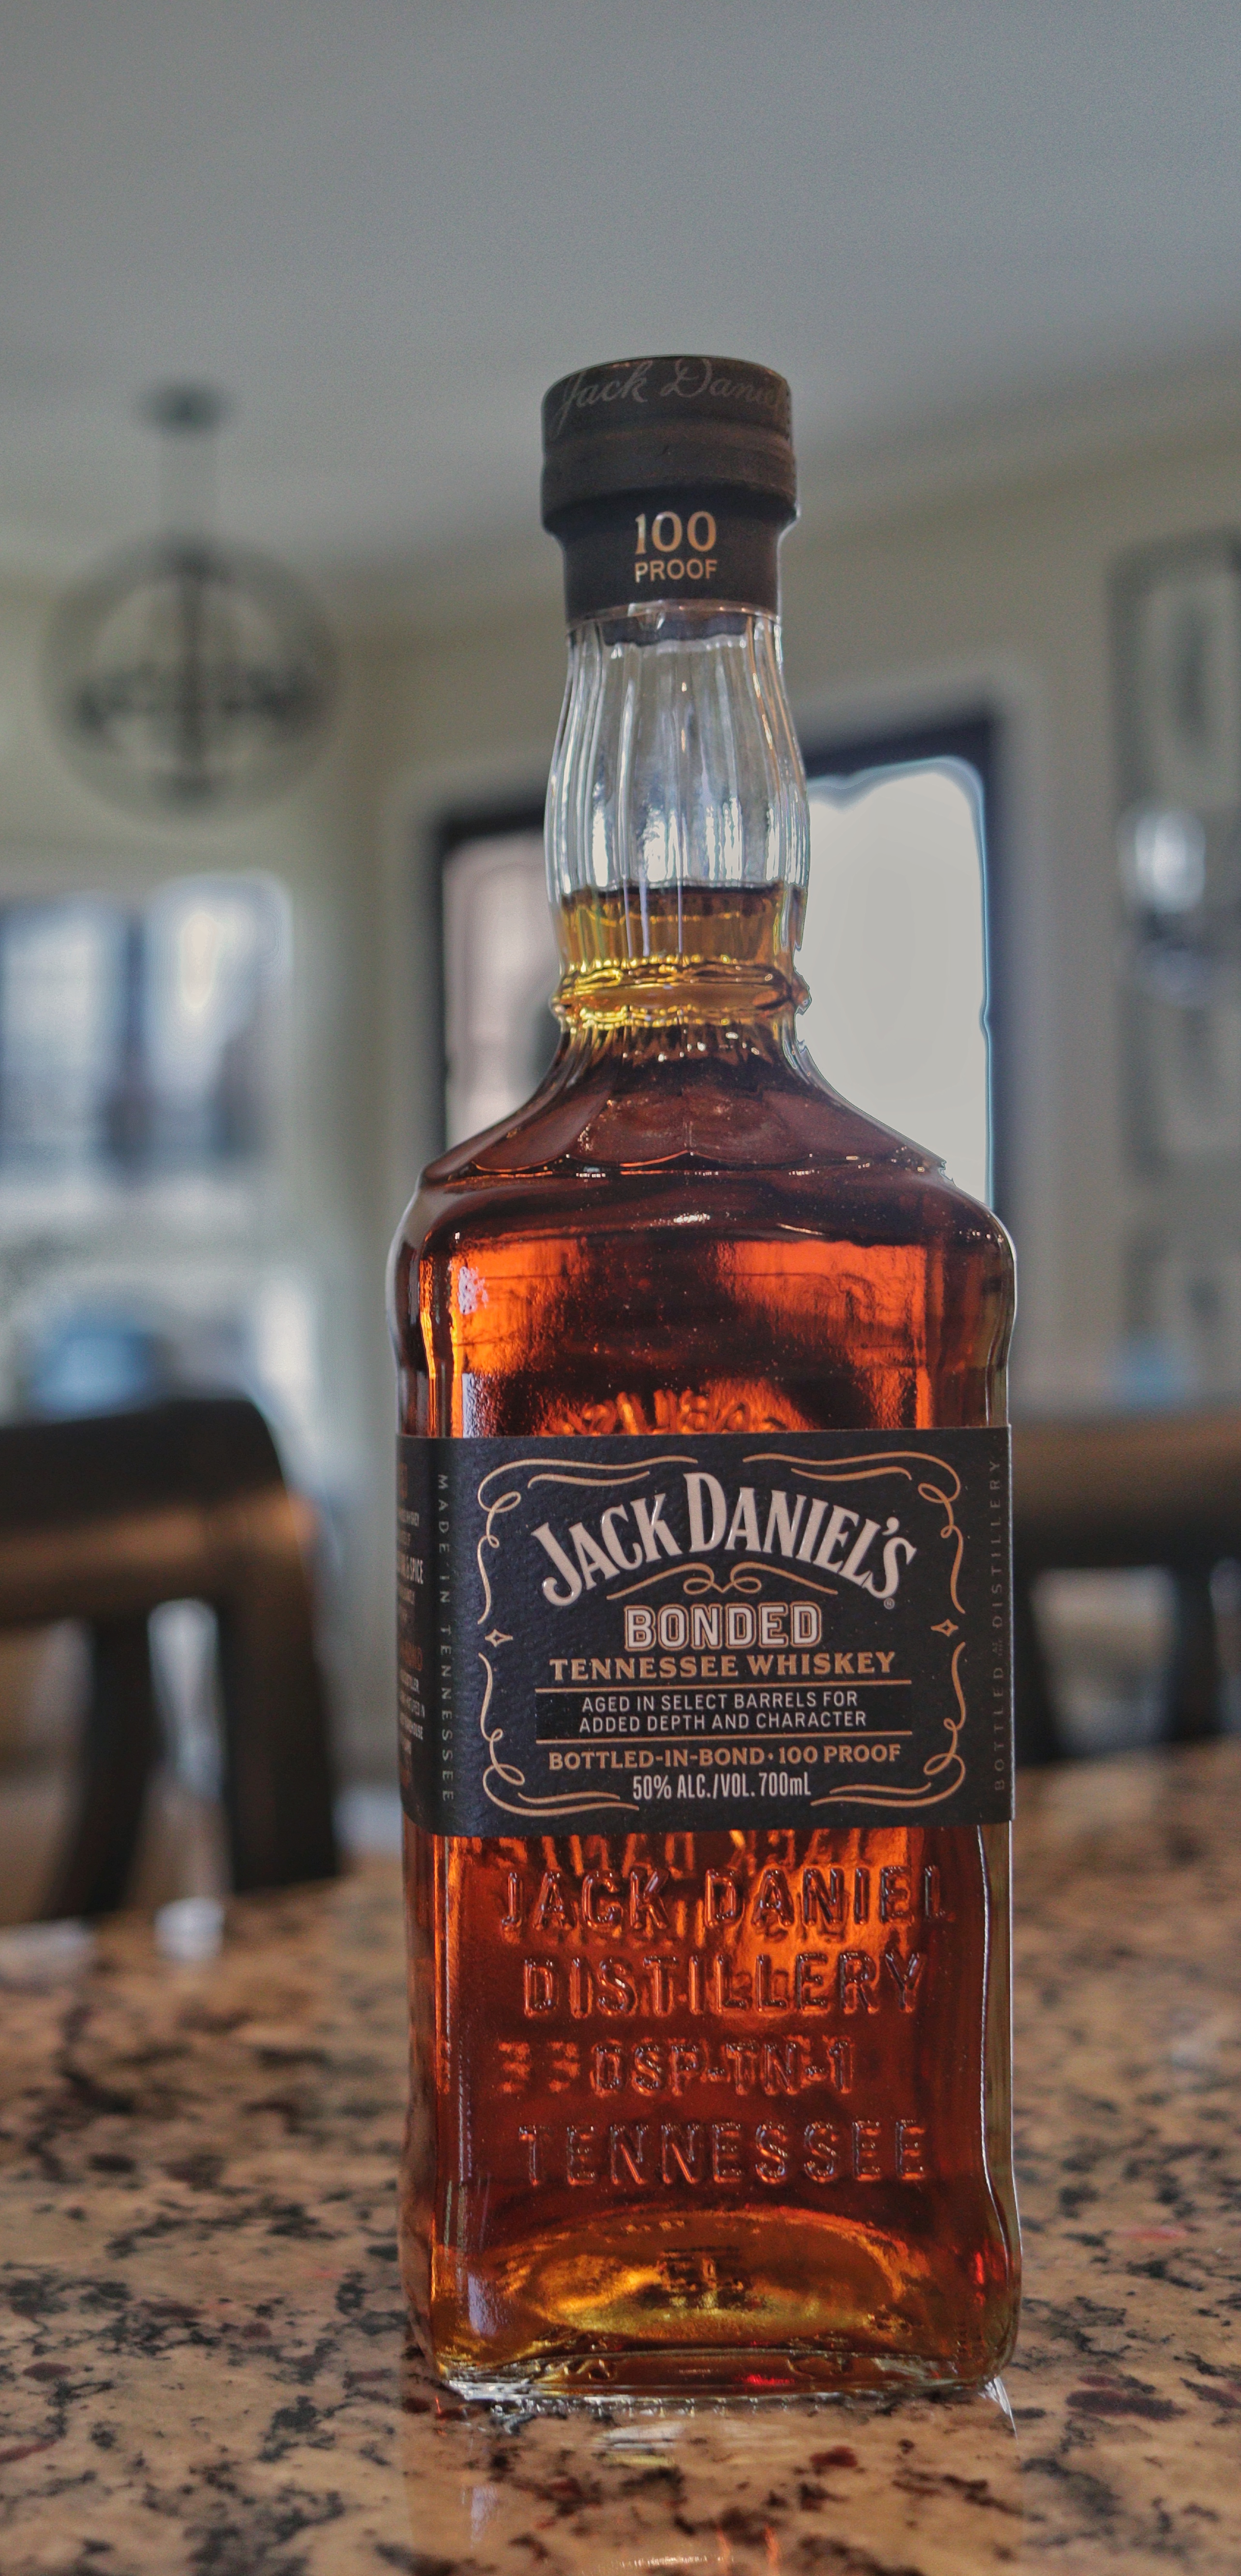 Jack Daniel’s Bonded Named “Whisky of the Year” by Whisky Advocate